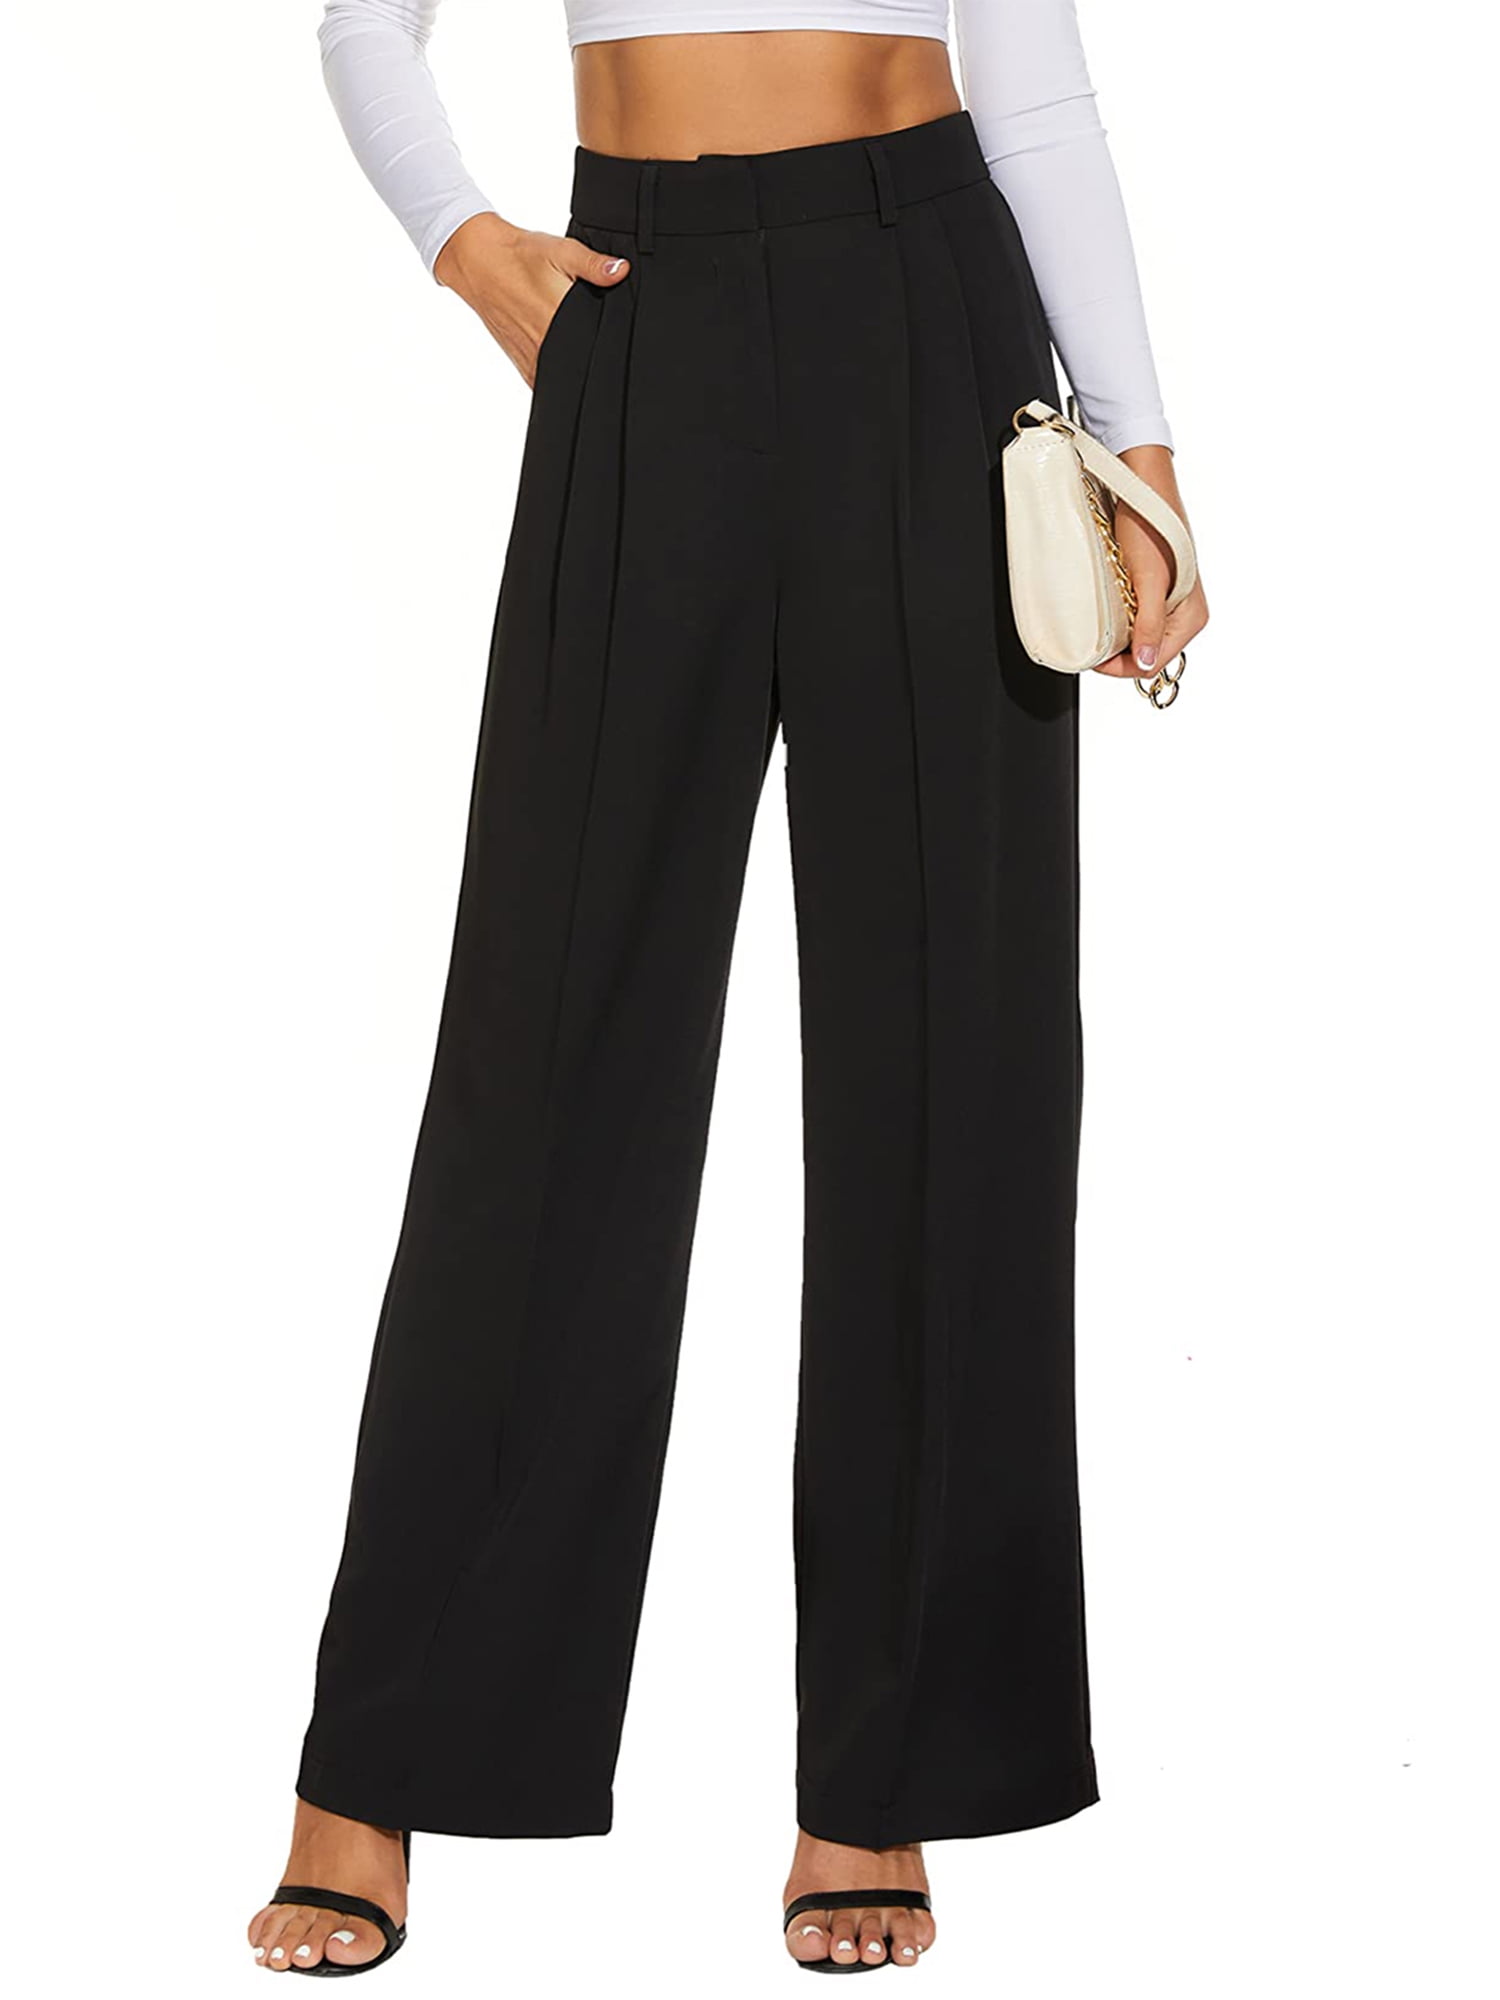 Slim Pant Leg Straight Pockets Leg Wide Suit Women\'s Pants Fit Straight Trousers Fit with Classic